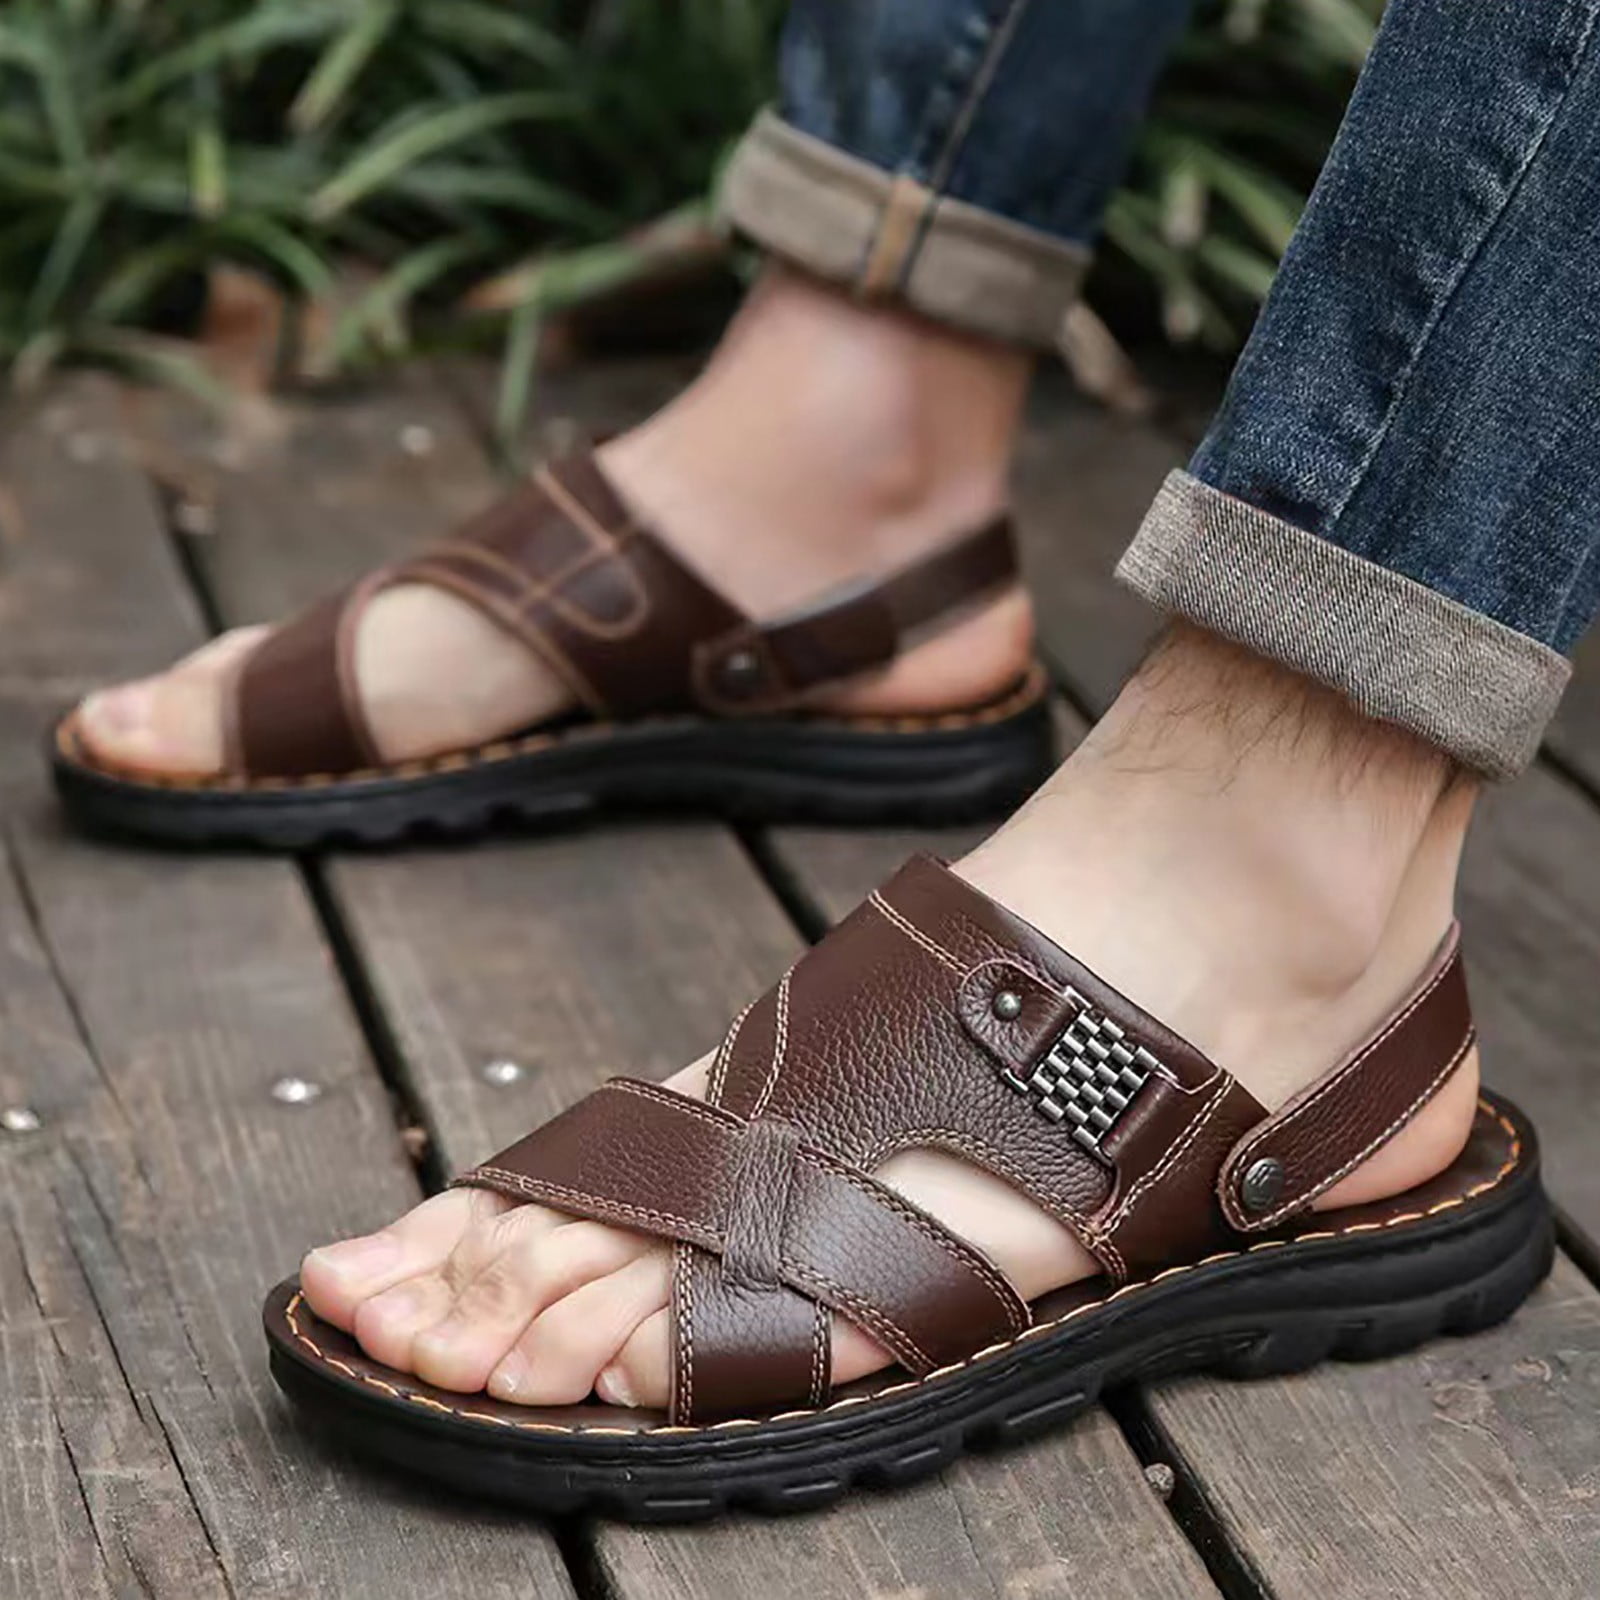 Comfortable American Club CY13 / 20 leather sports sandals brown - KeeShoes